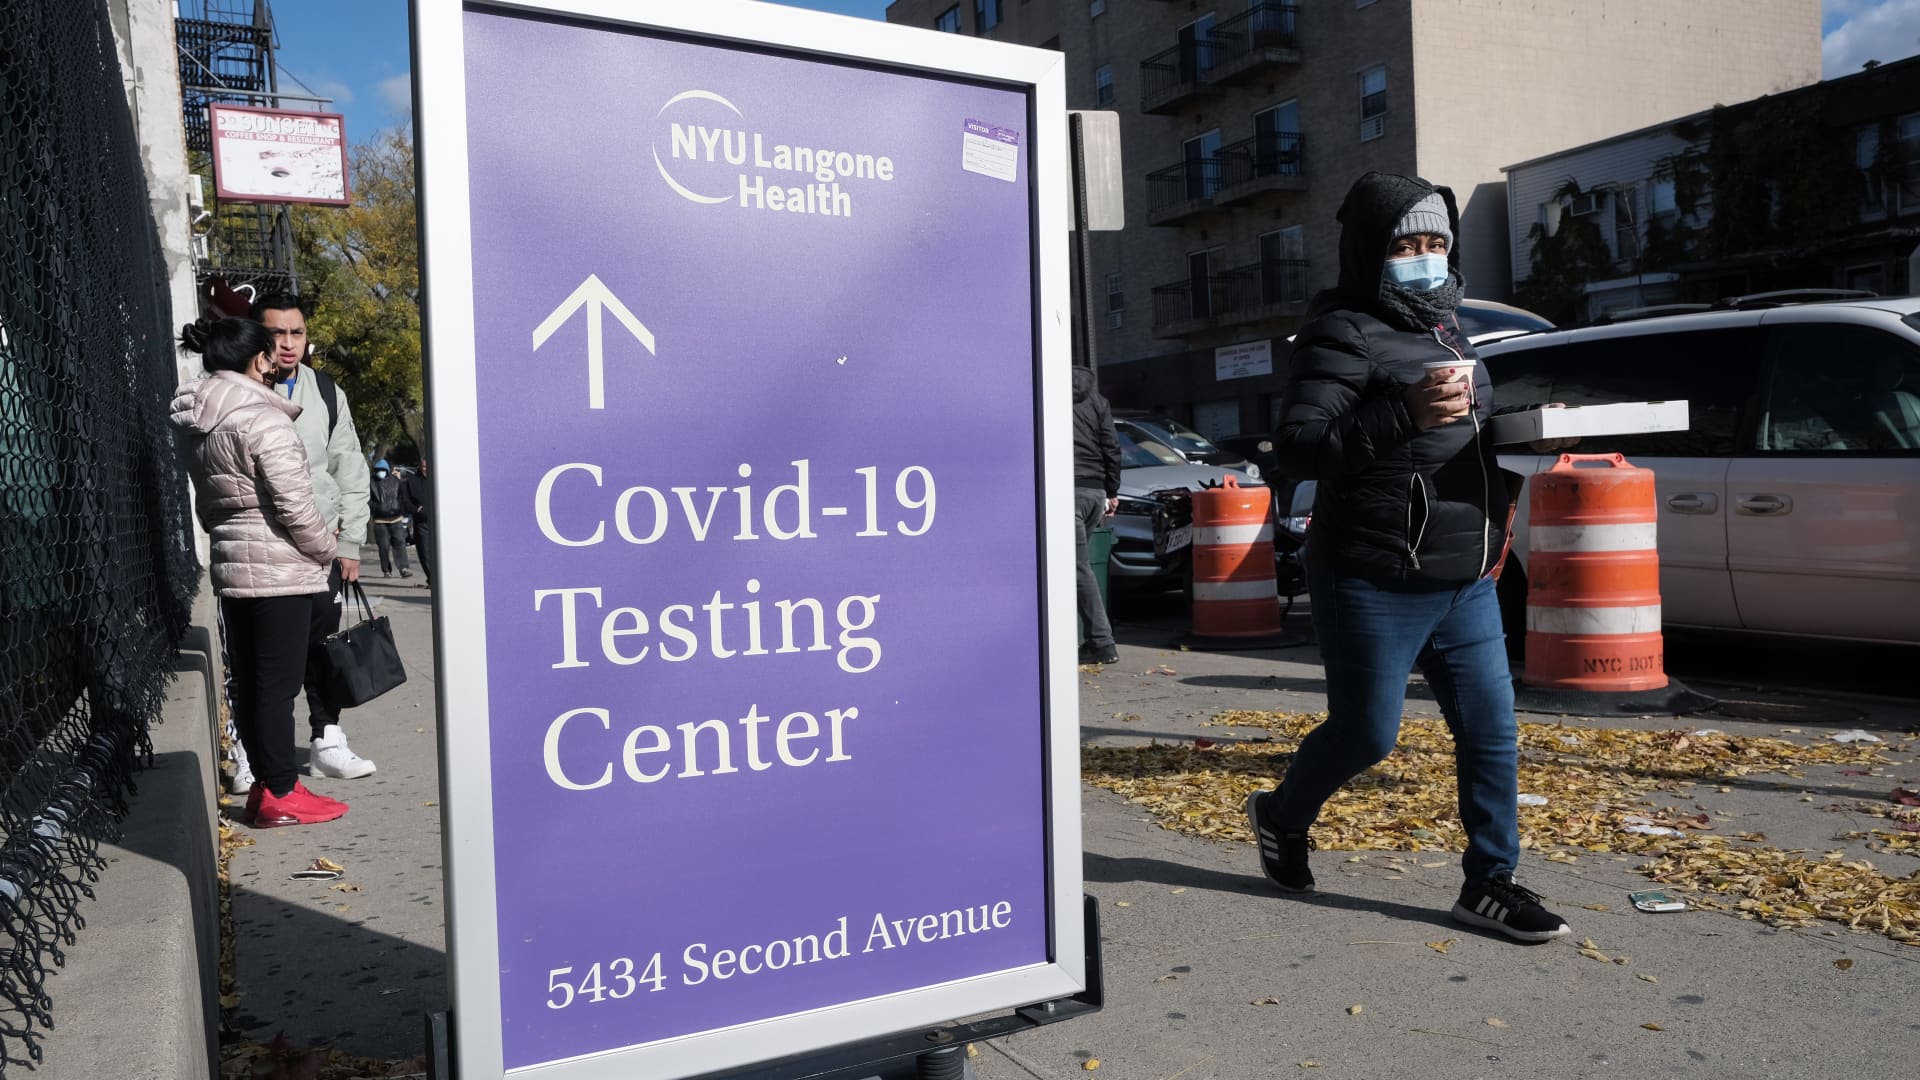 CDC eases Covid guidance as U.S. has more tools to fight the virus and keep people out of the hospital